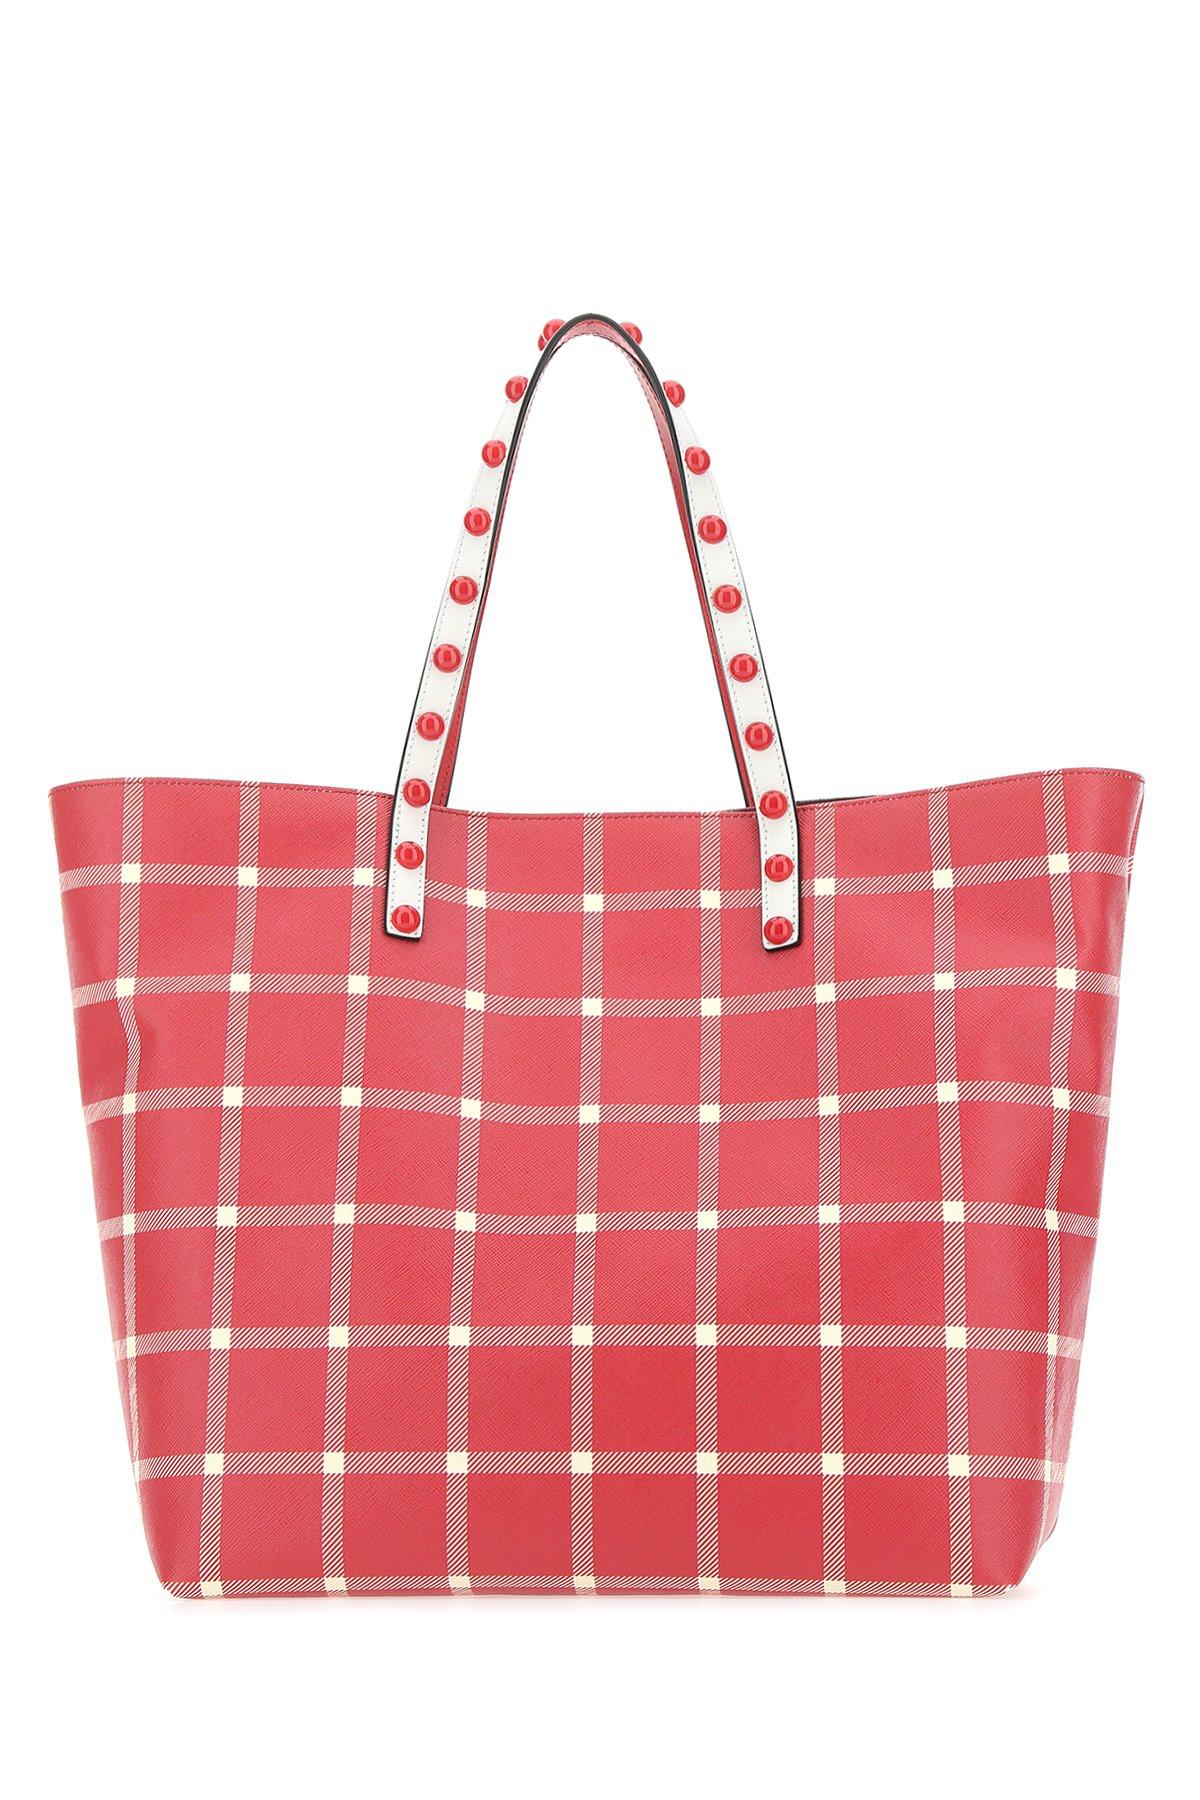 Oberst Geologi Bandit RED Valentino Plaid Shopper Bag in Red - Lyst